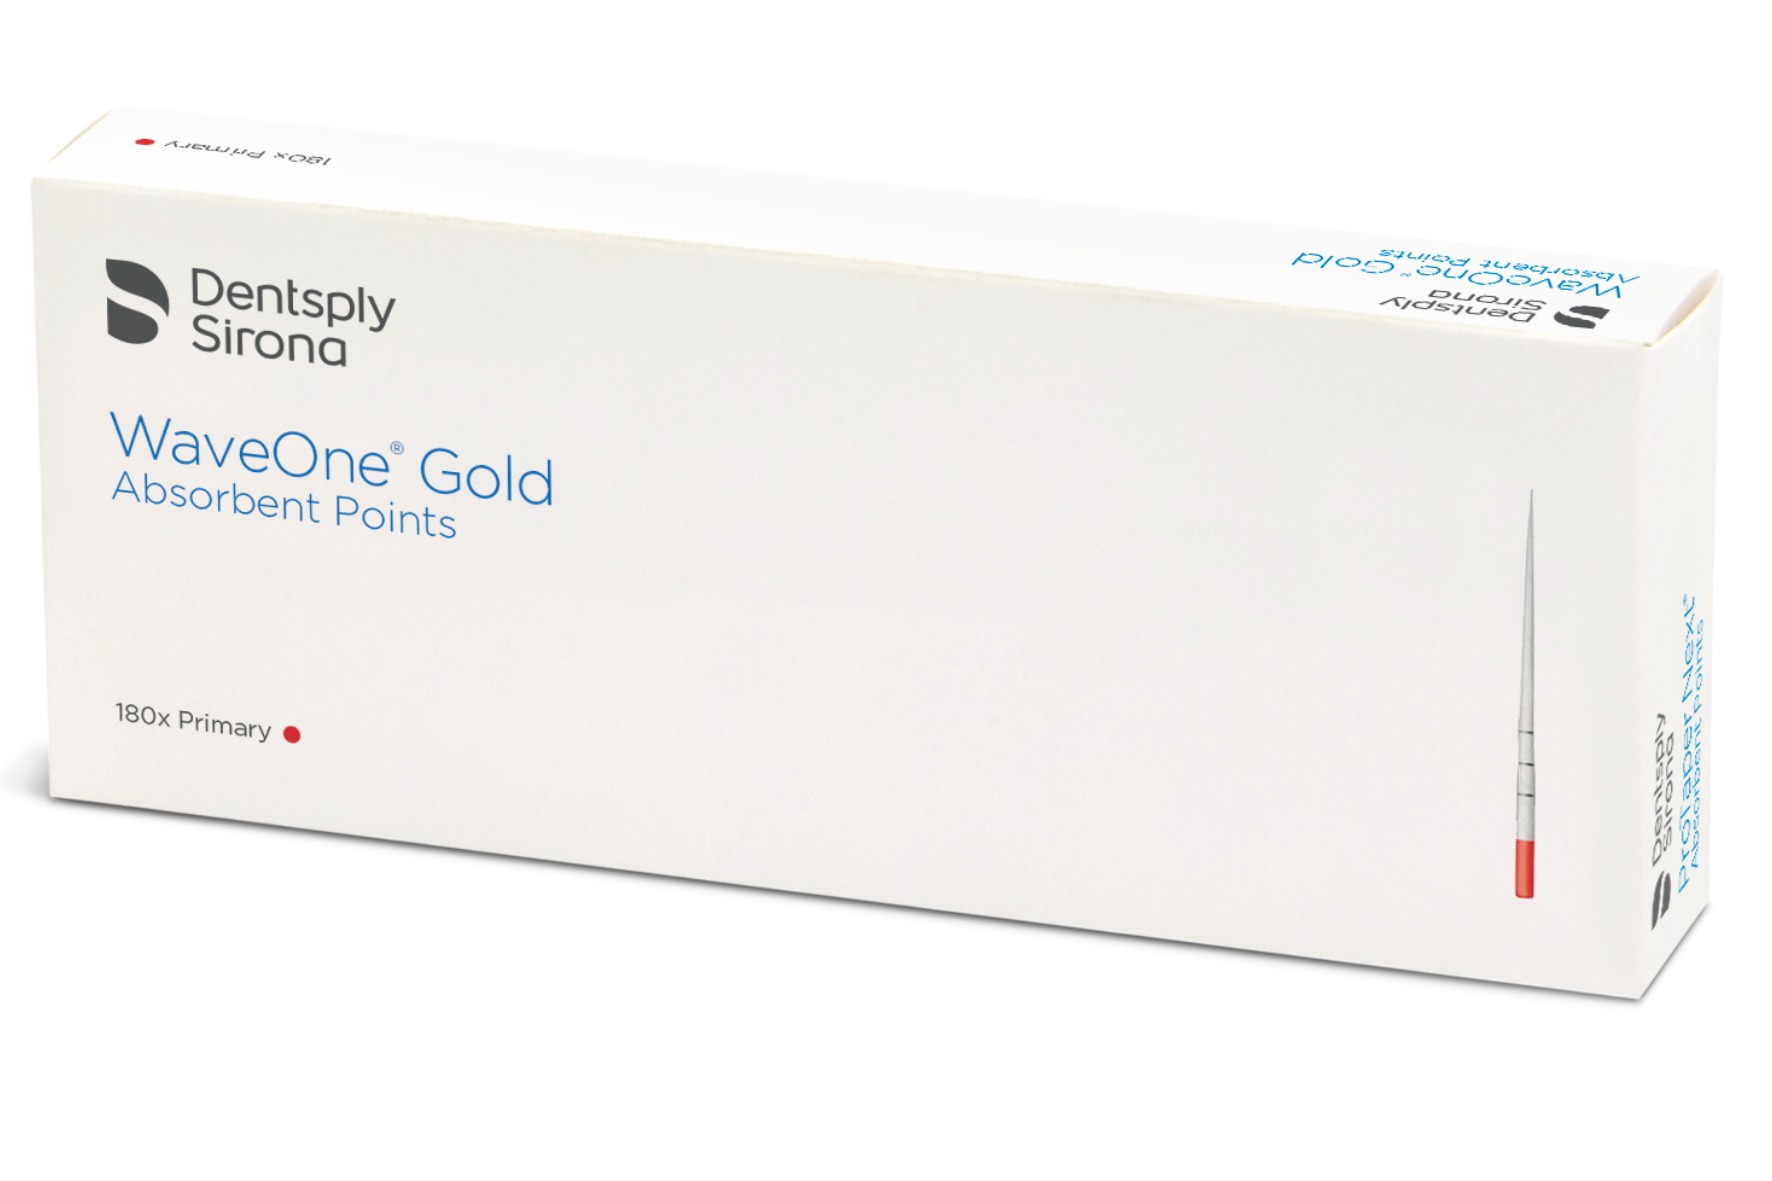 WaveOne Gold Absorbent Points